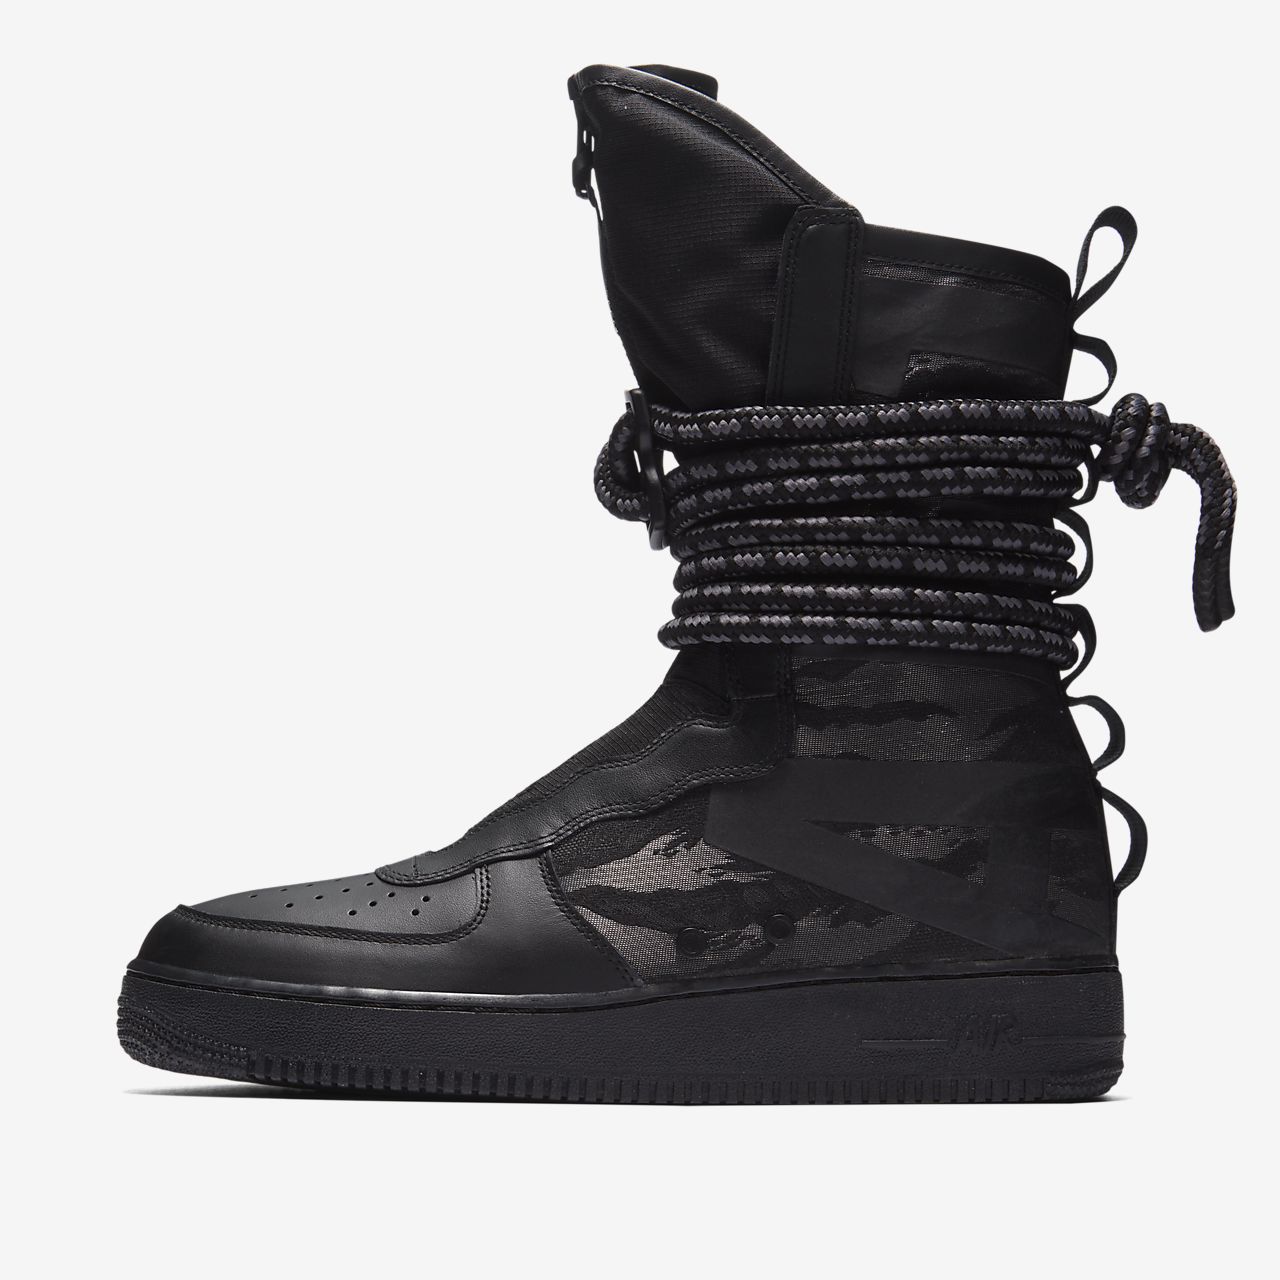 nike air force boots black